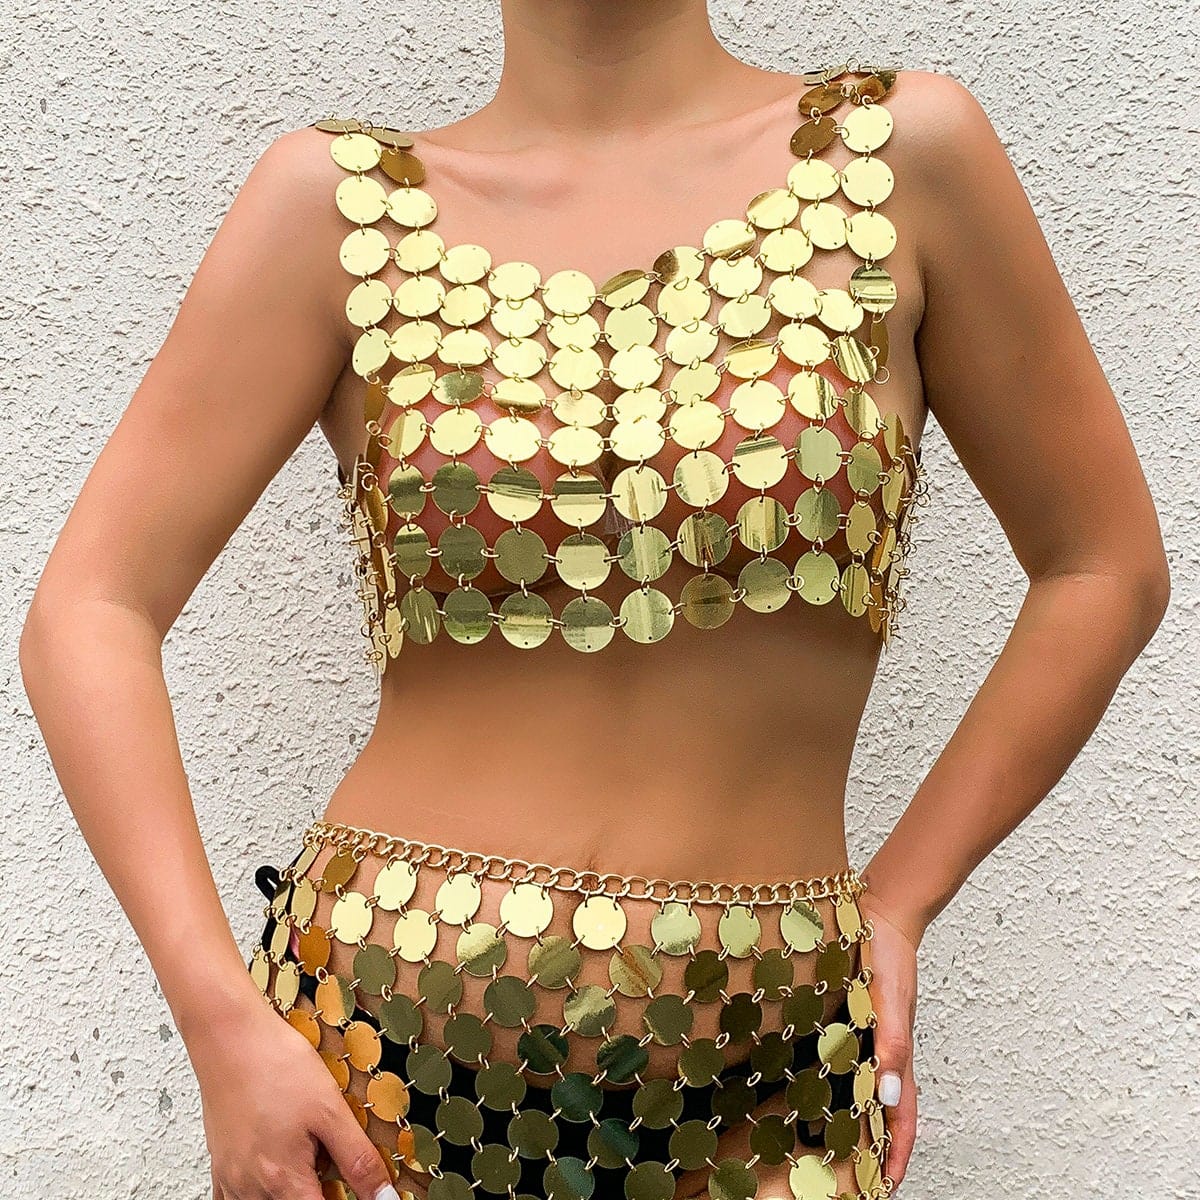 Handmade Gold Silver Tone Glitter Sequins Party Tank Top